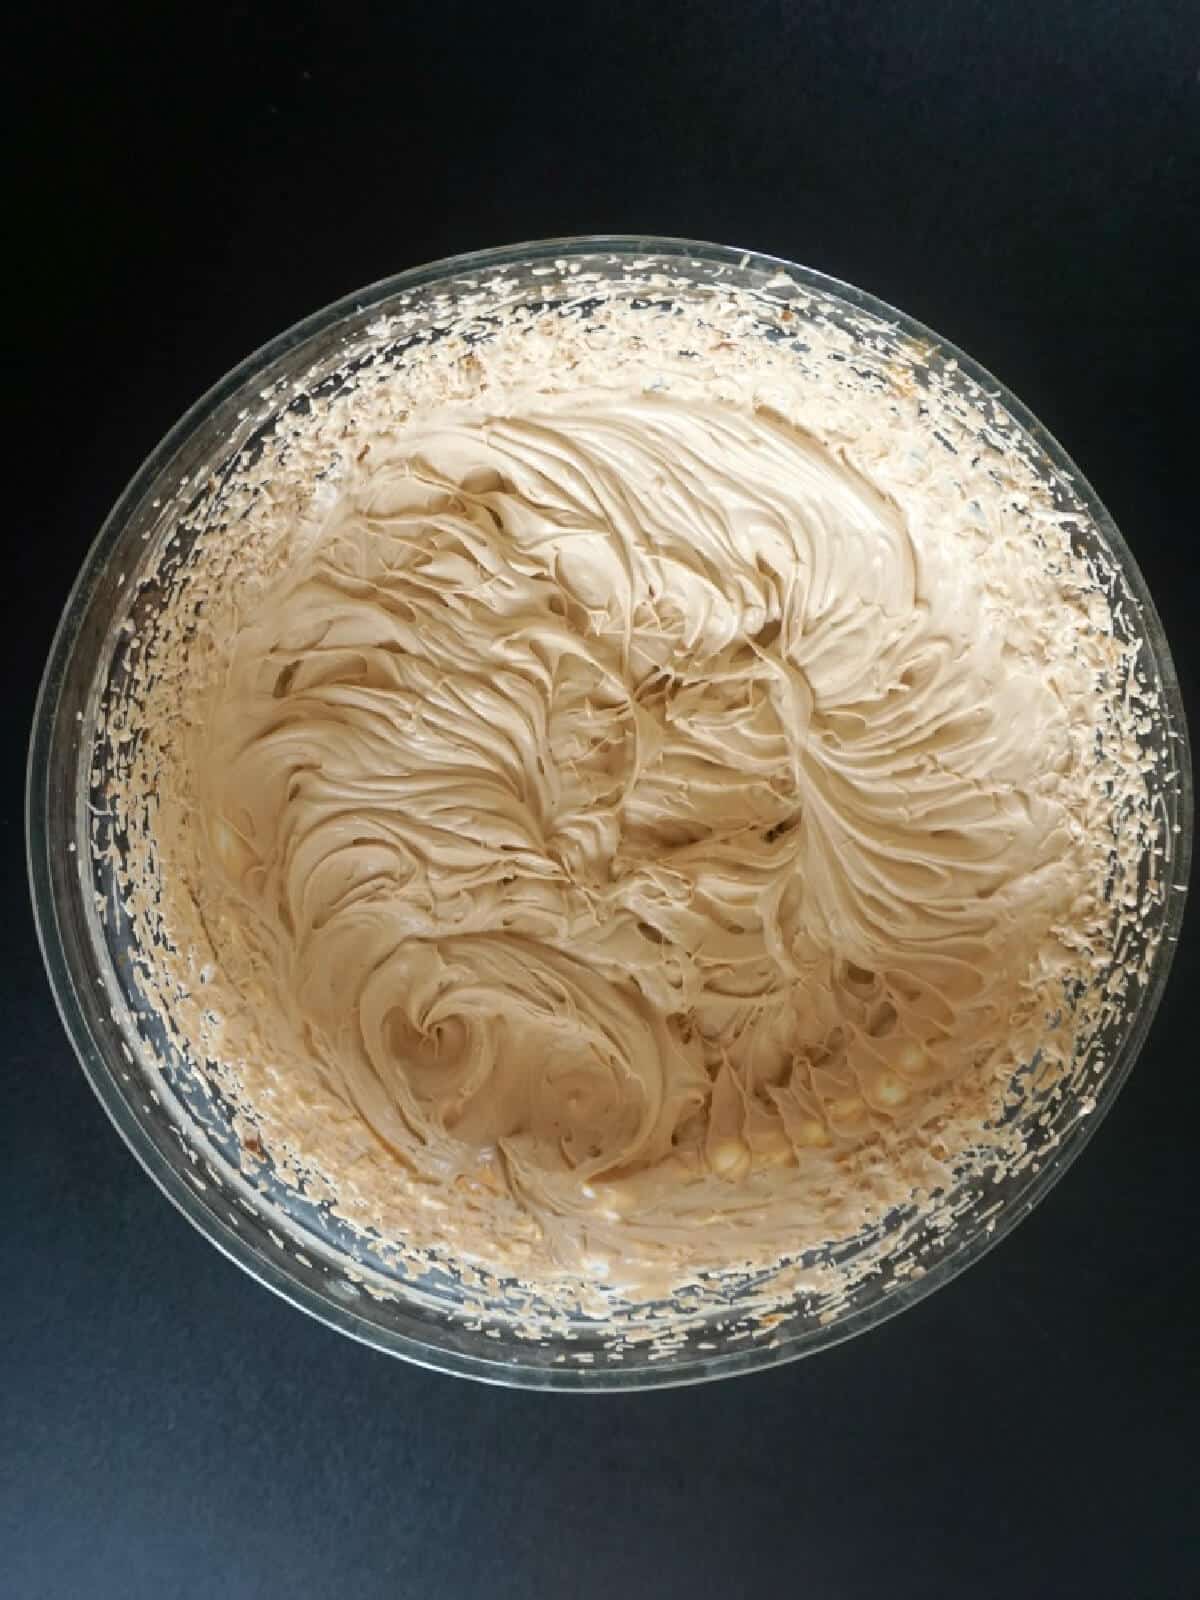 A bowl with coffee ice cream to be frozen.